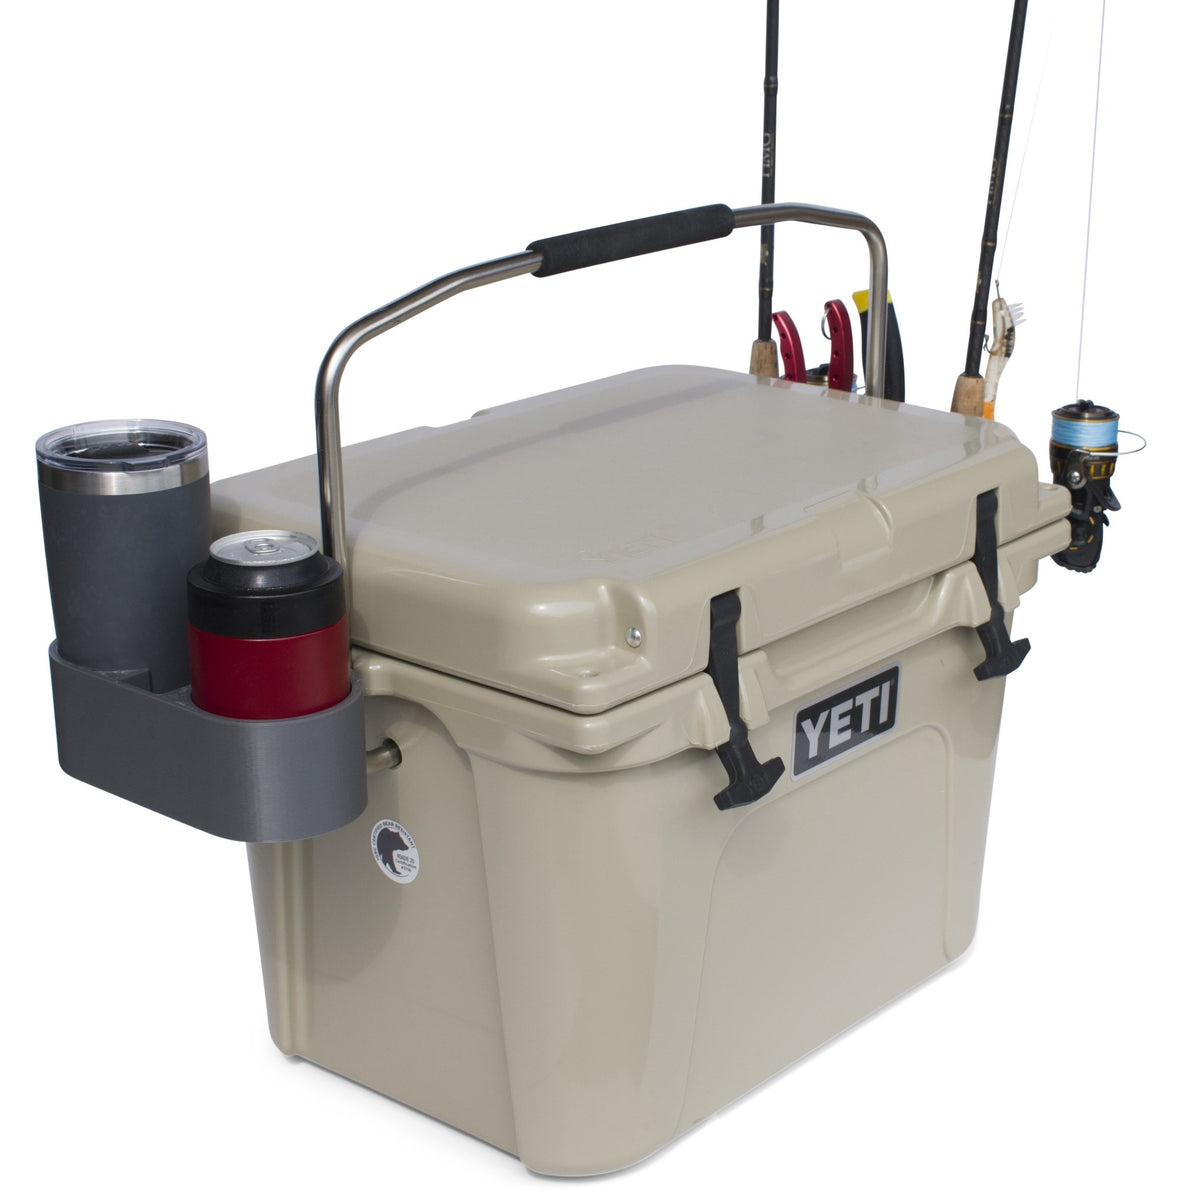 Fishing Rod Holder for YETI Tundra Coolers – Tideline3D